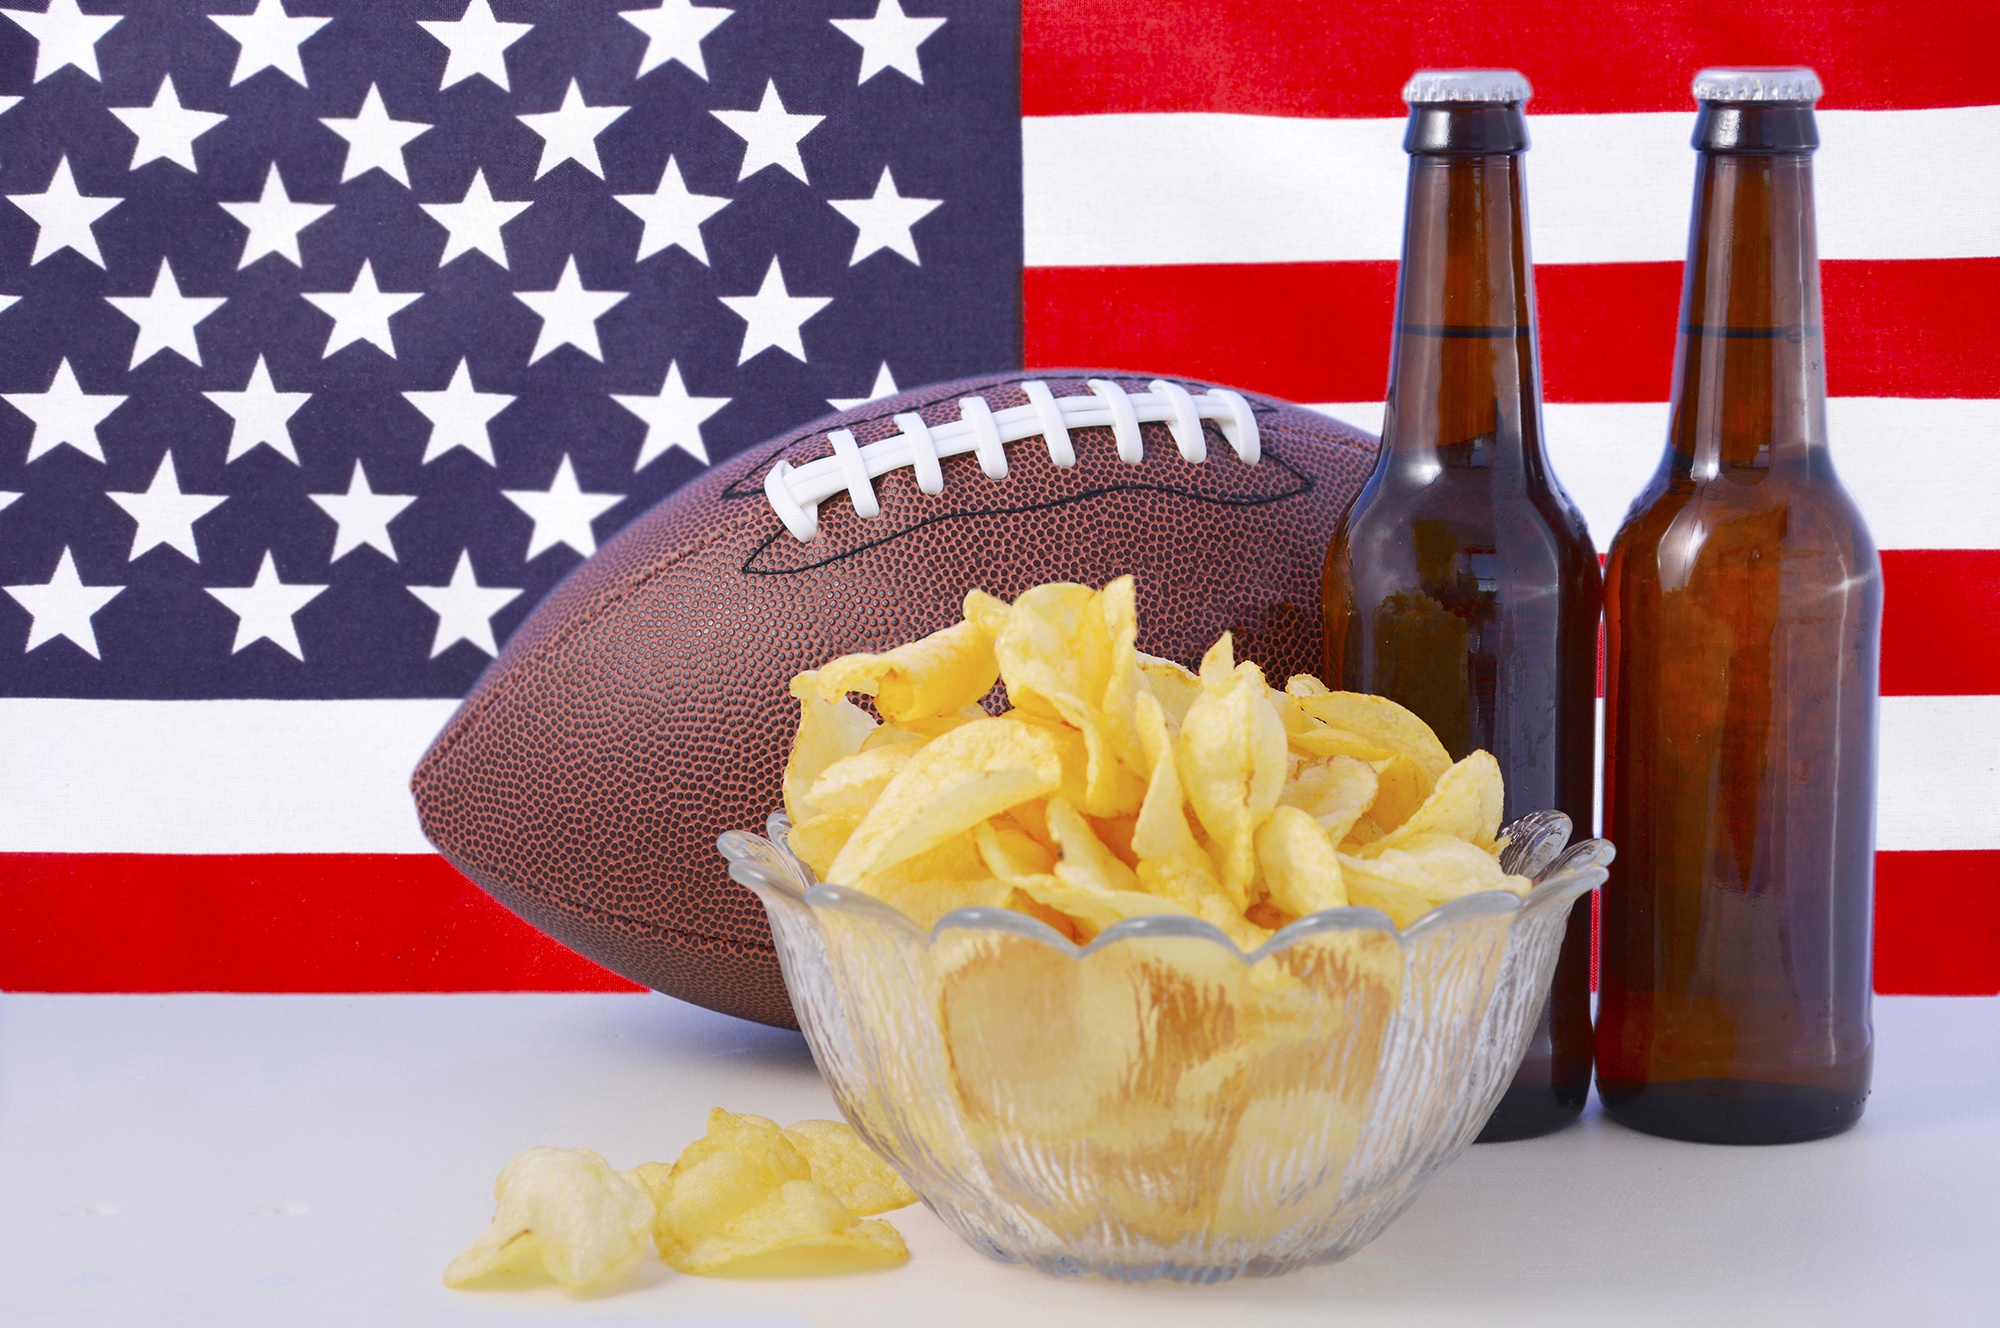 photography, still life, alcohol, american flag, ball, beer, chips 2160p